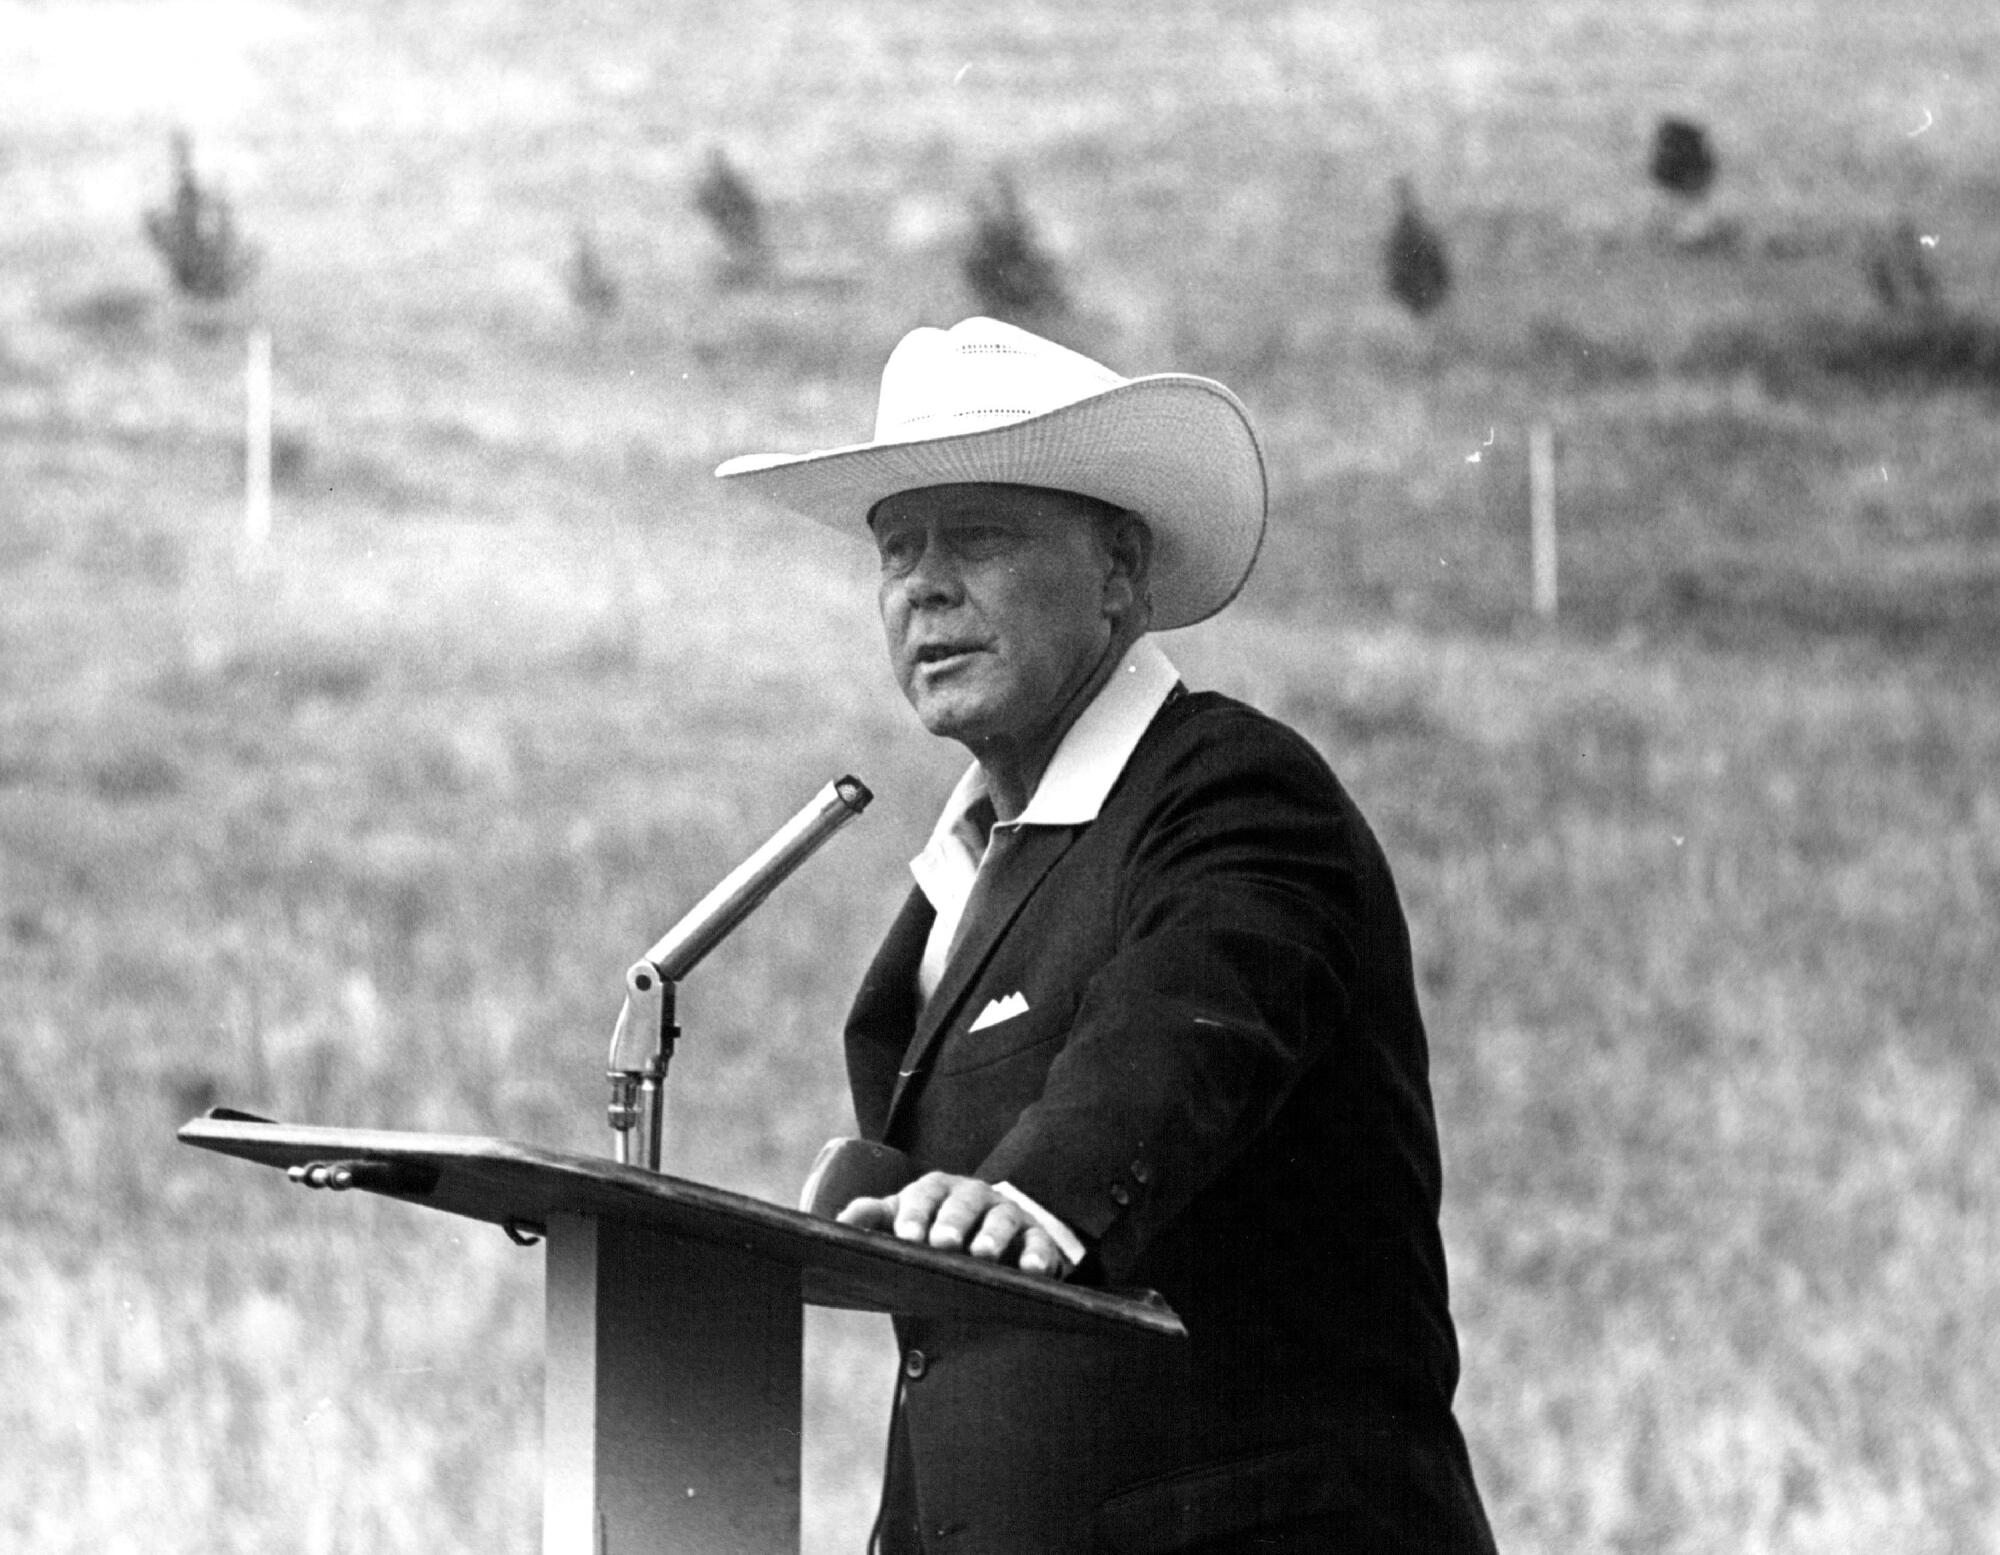 Black and white image shows man in light cowboy had and dark suit at a lectern outdoors. 